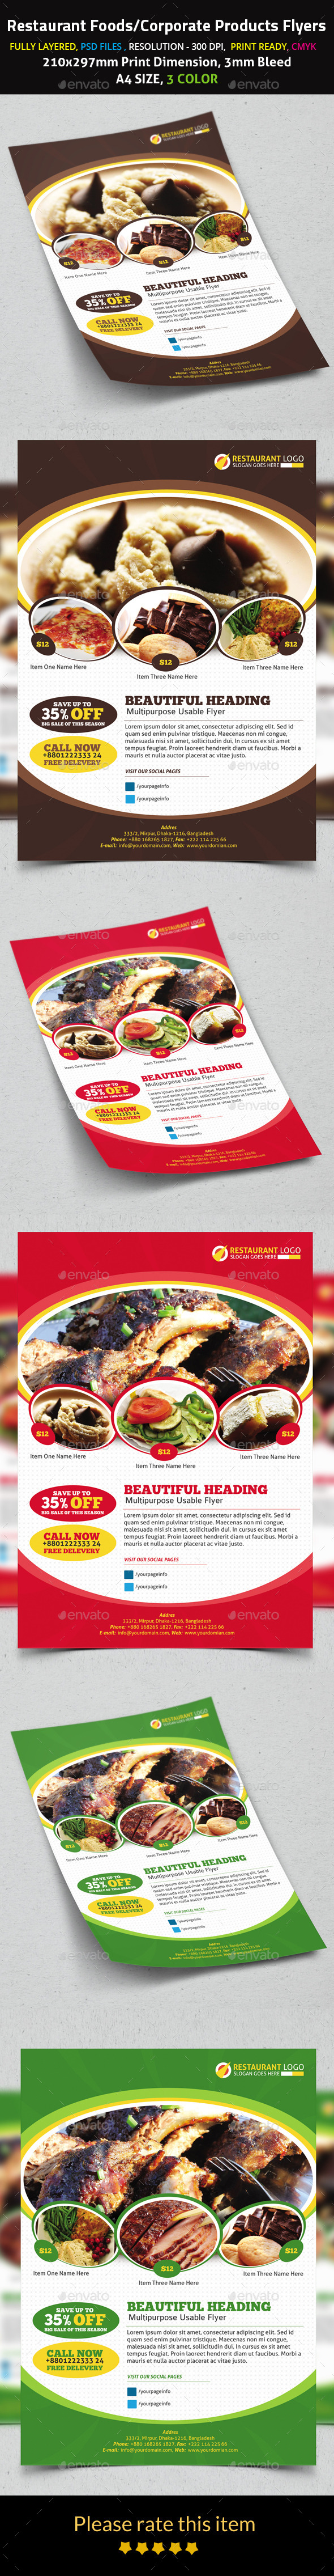 Restaurant Foods/Corporate Products Flyers